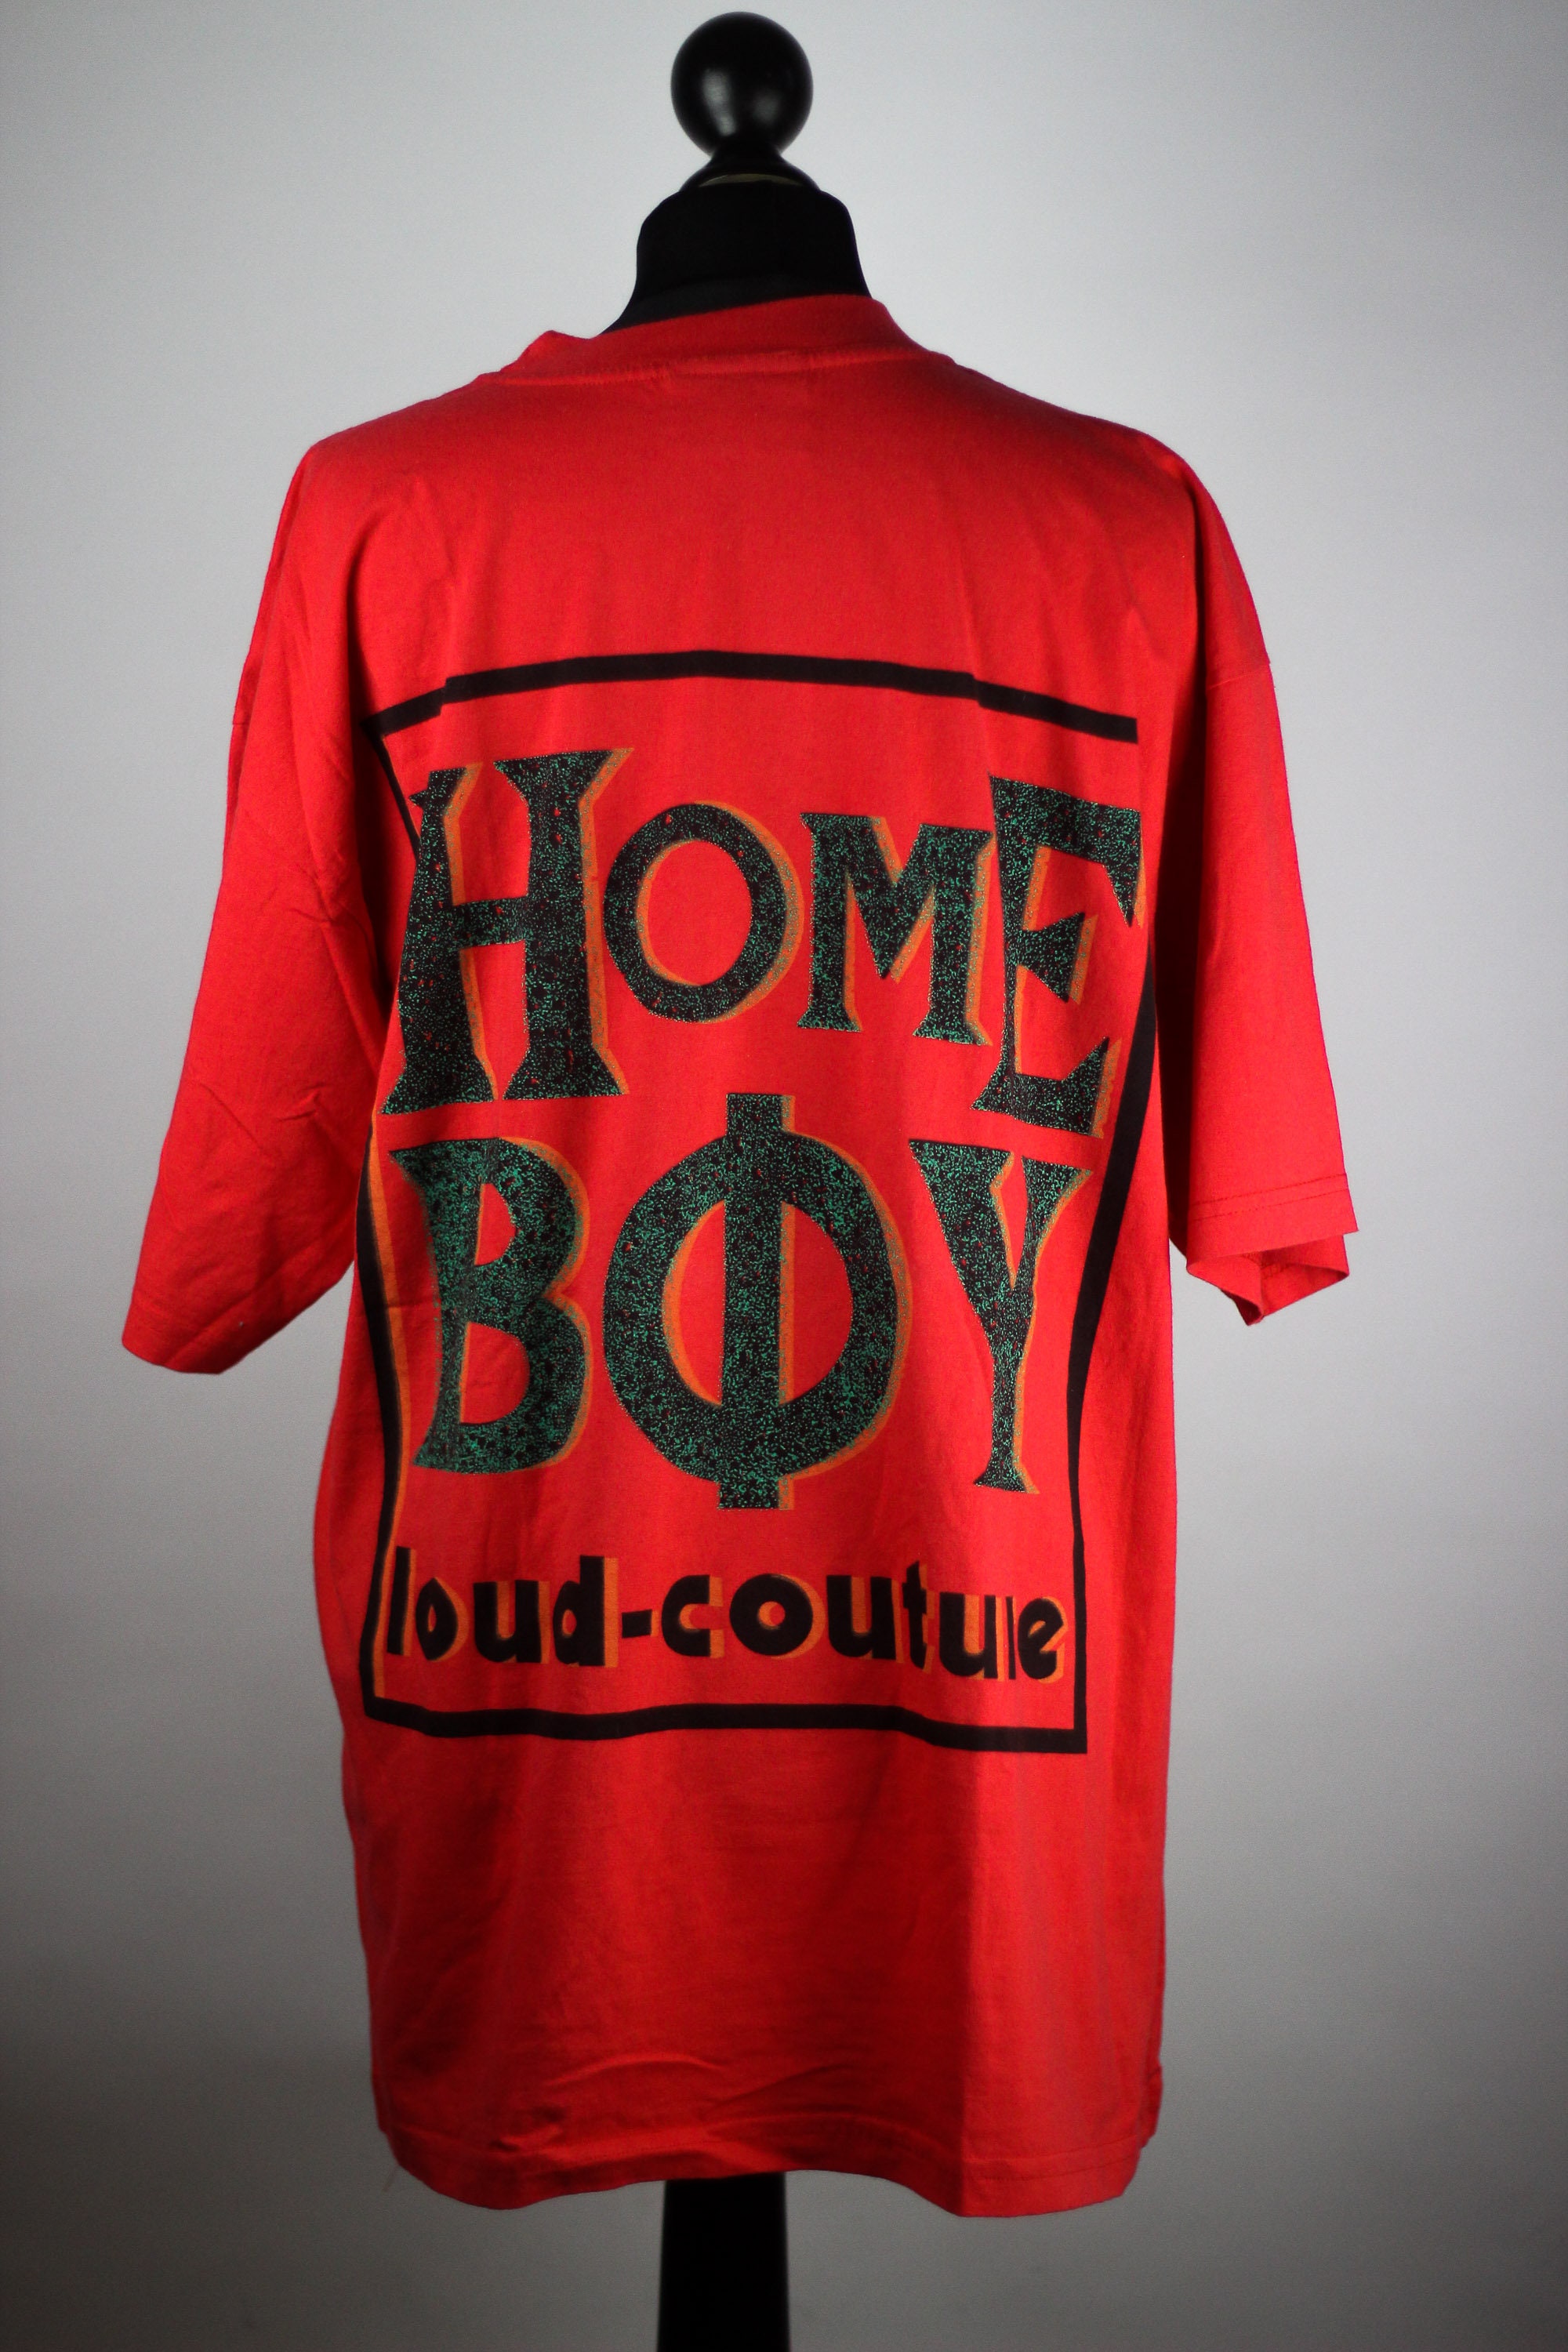 Vintage HOMEBOY Shirt XXL, Red T-Shirt Loud Couture, 90s Sportswear